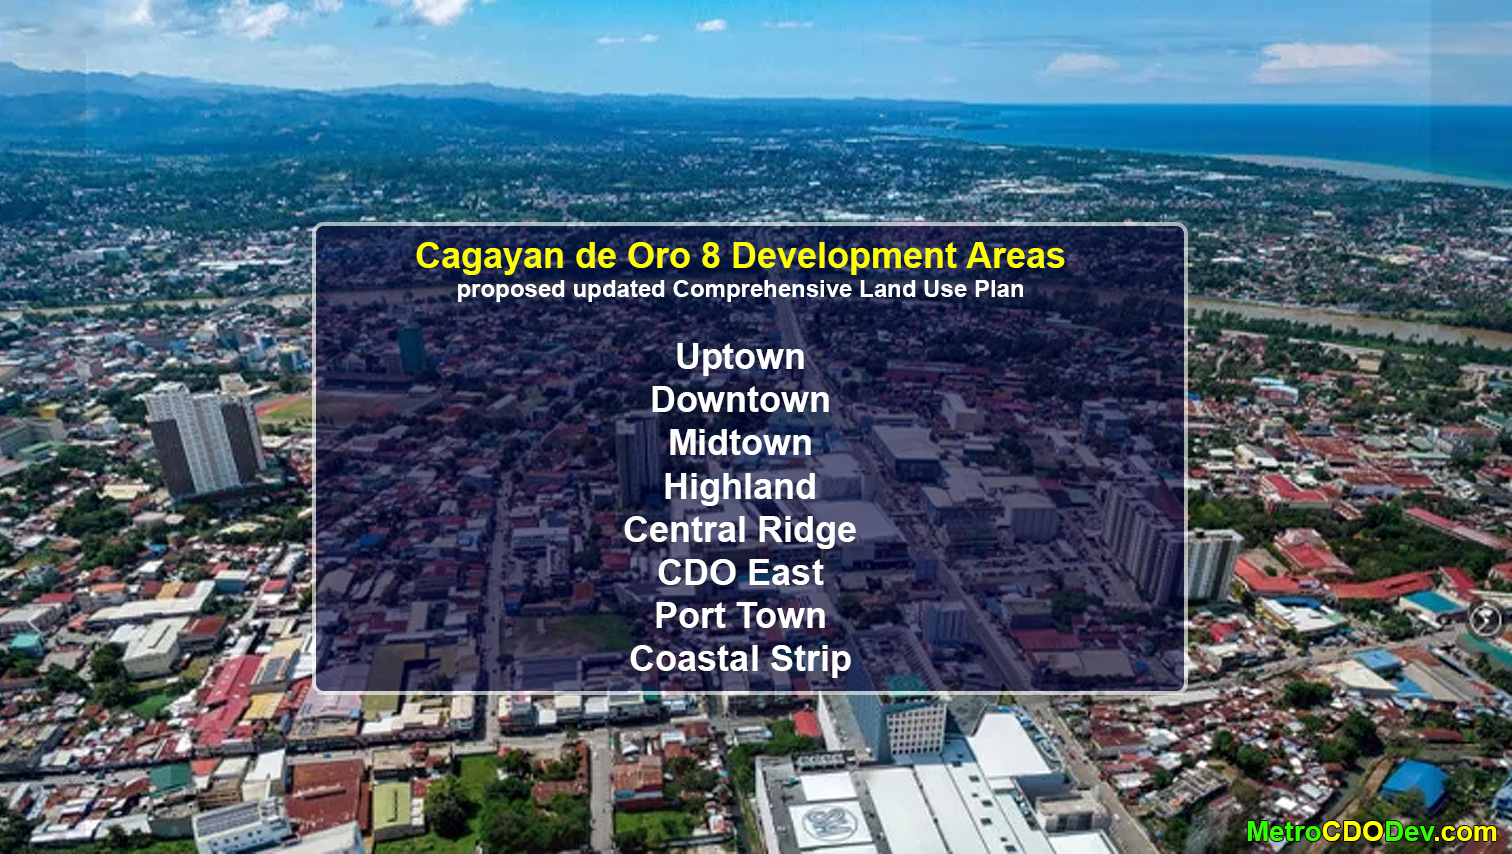 PROGRESS WATCH: Cagayan de Oro proposed land use plan now expands development areas to eight